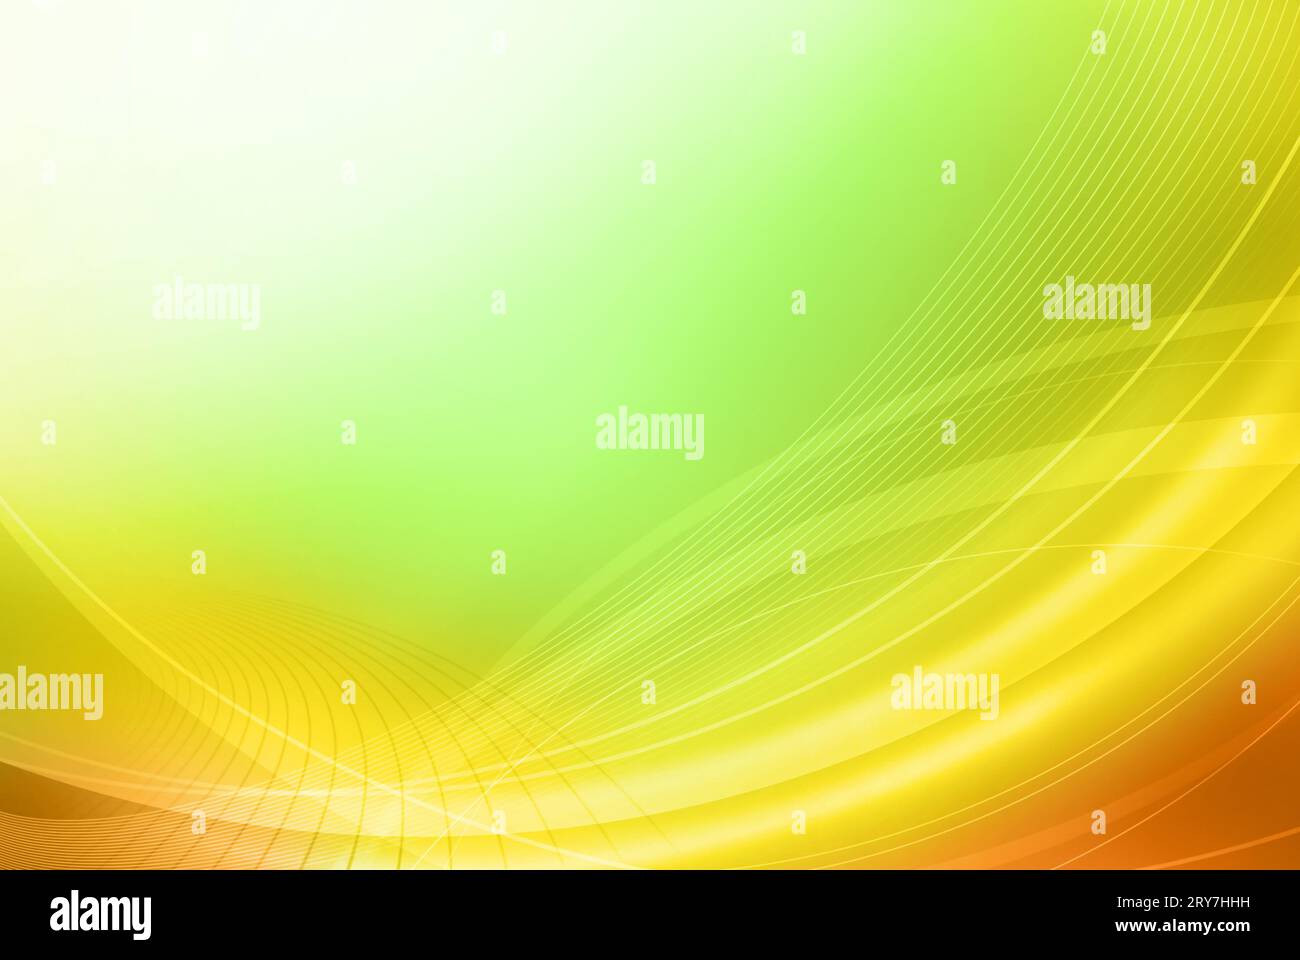 Bright abstract multi-coloured background with curves Stock Photo